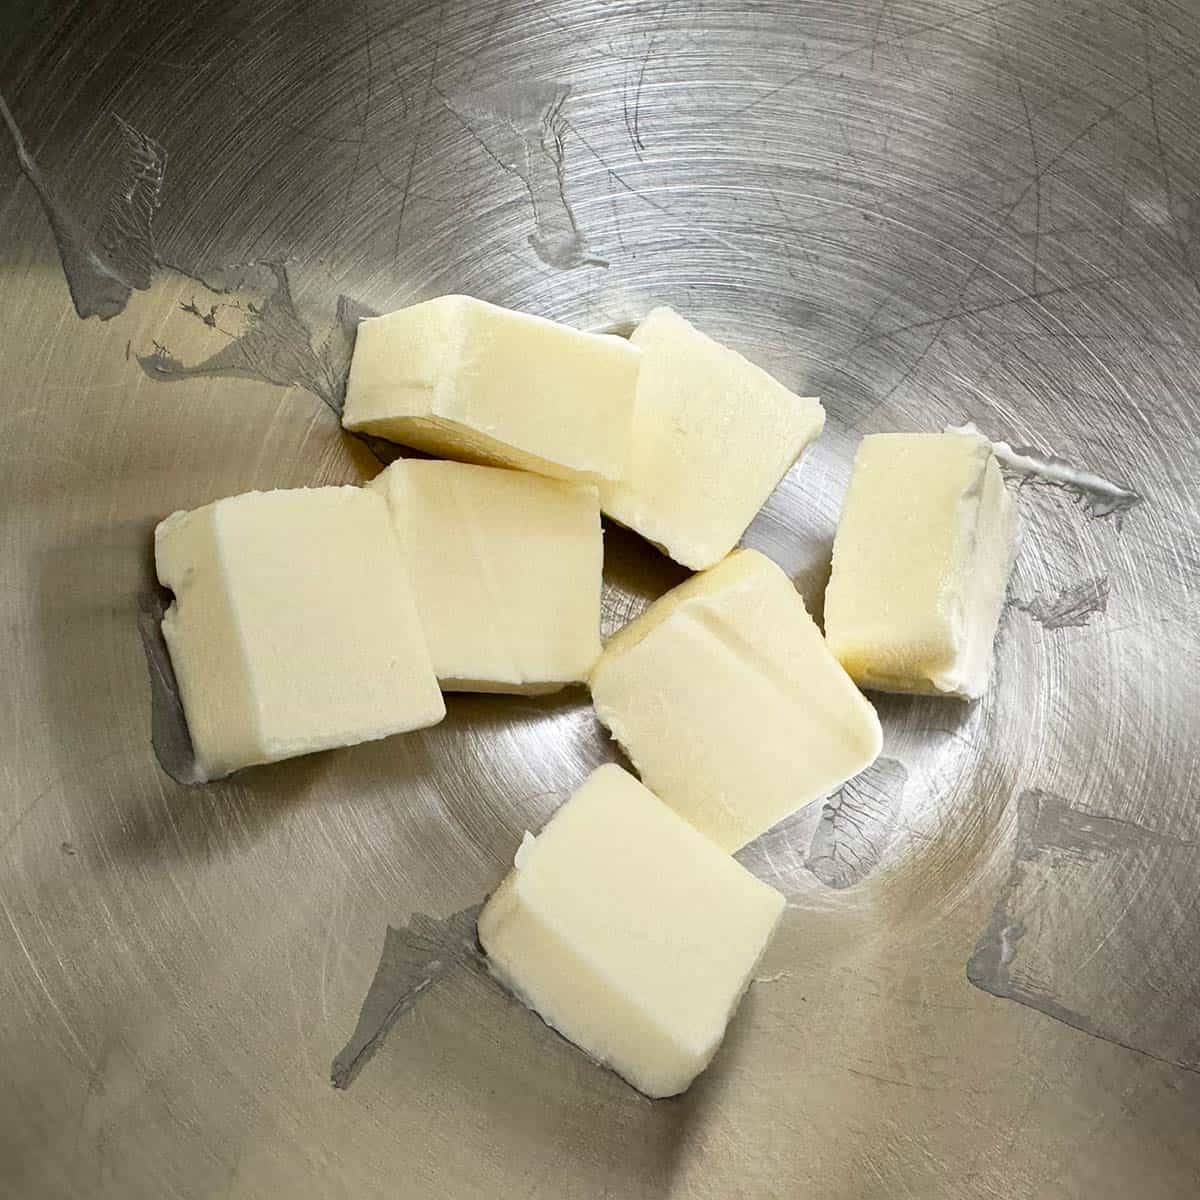 Cubed room temperature butter in a mixer bowl.